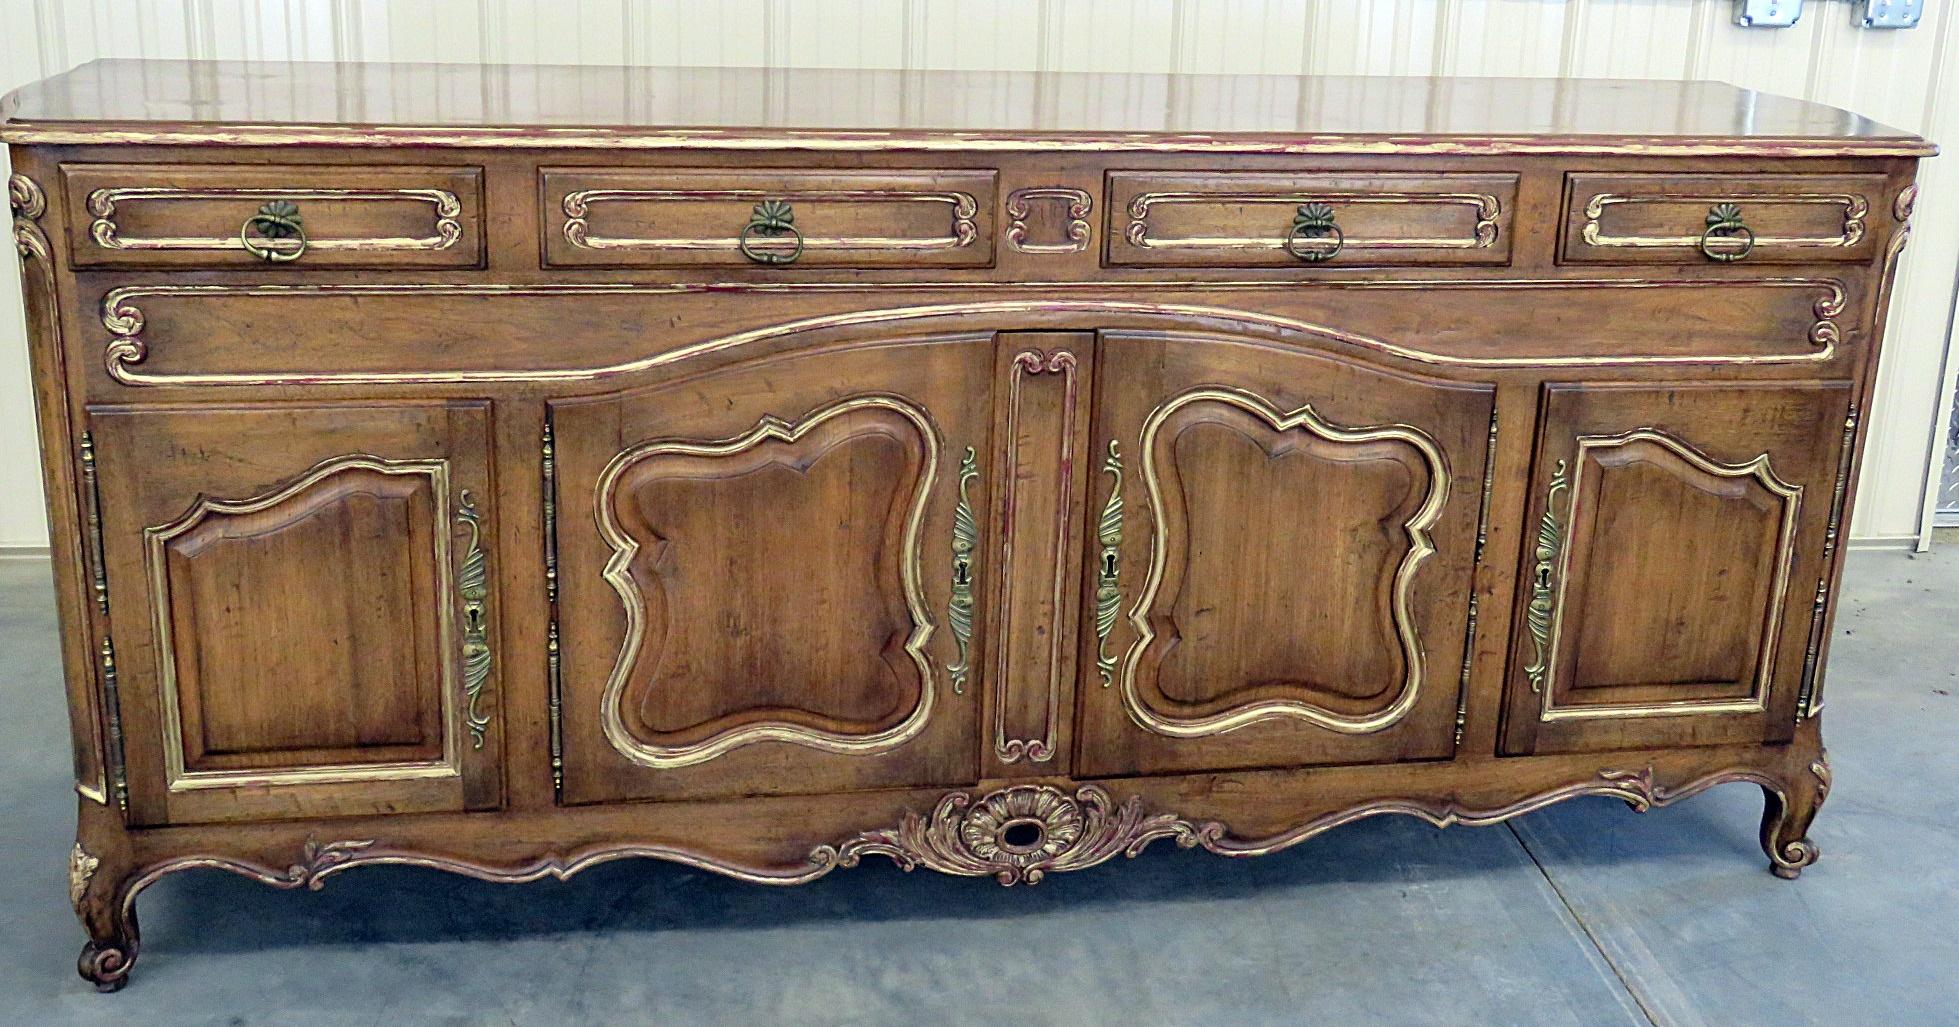 Attributed to Auffray because of the outstanding quality. This Country French distressed finished sideboard has 4 drawers over 4 doors containing 3 drawers and 2 shelves.